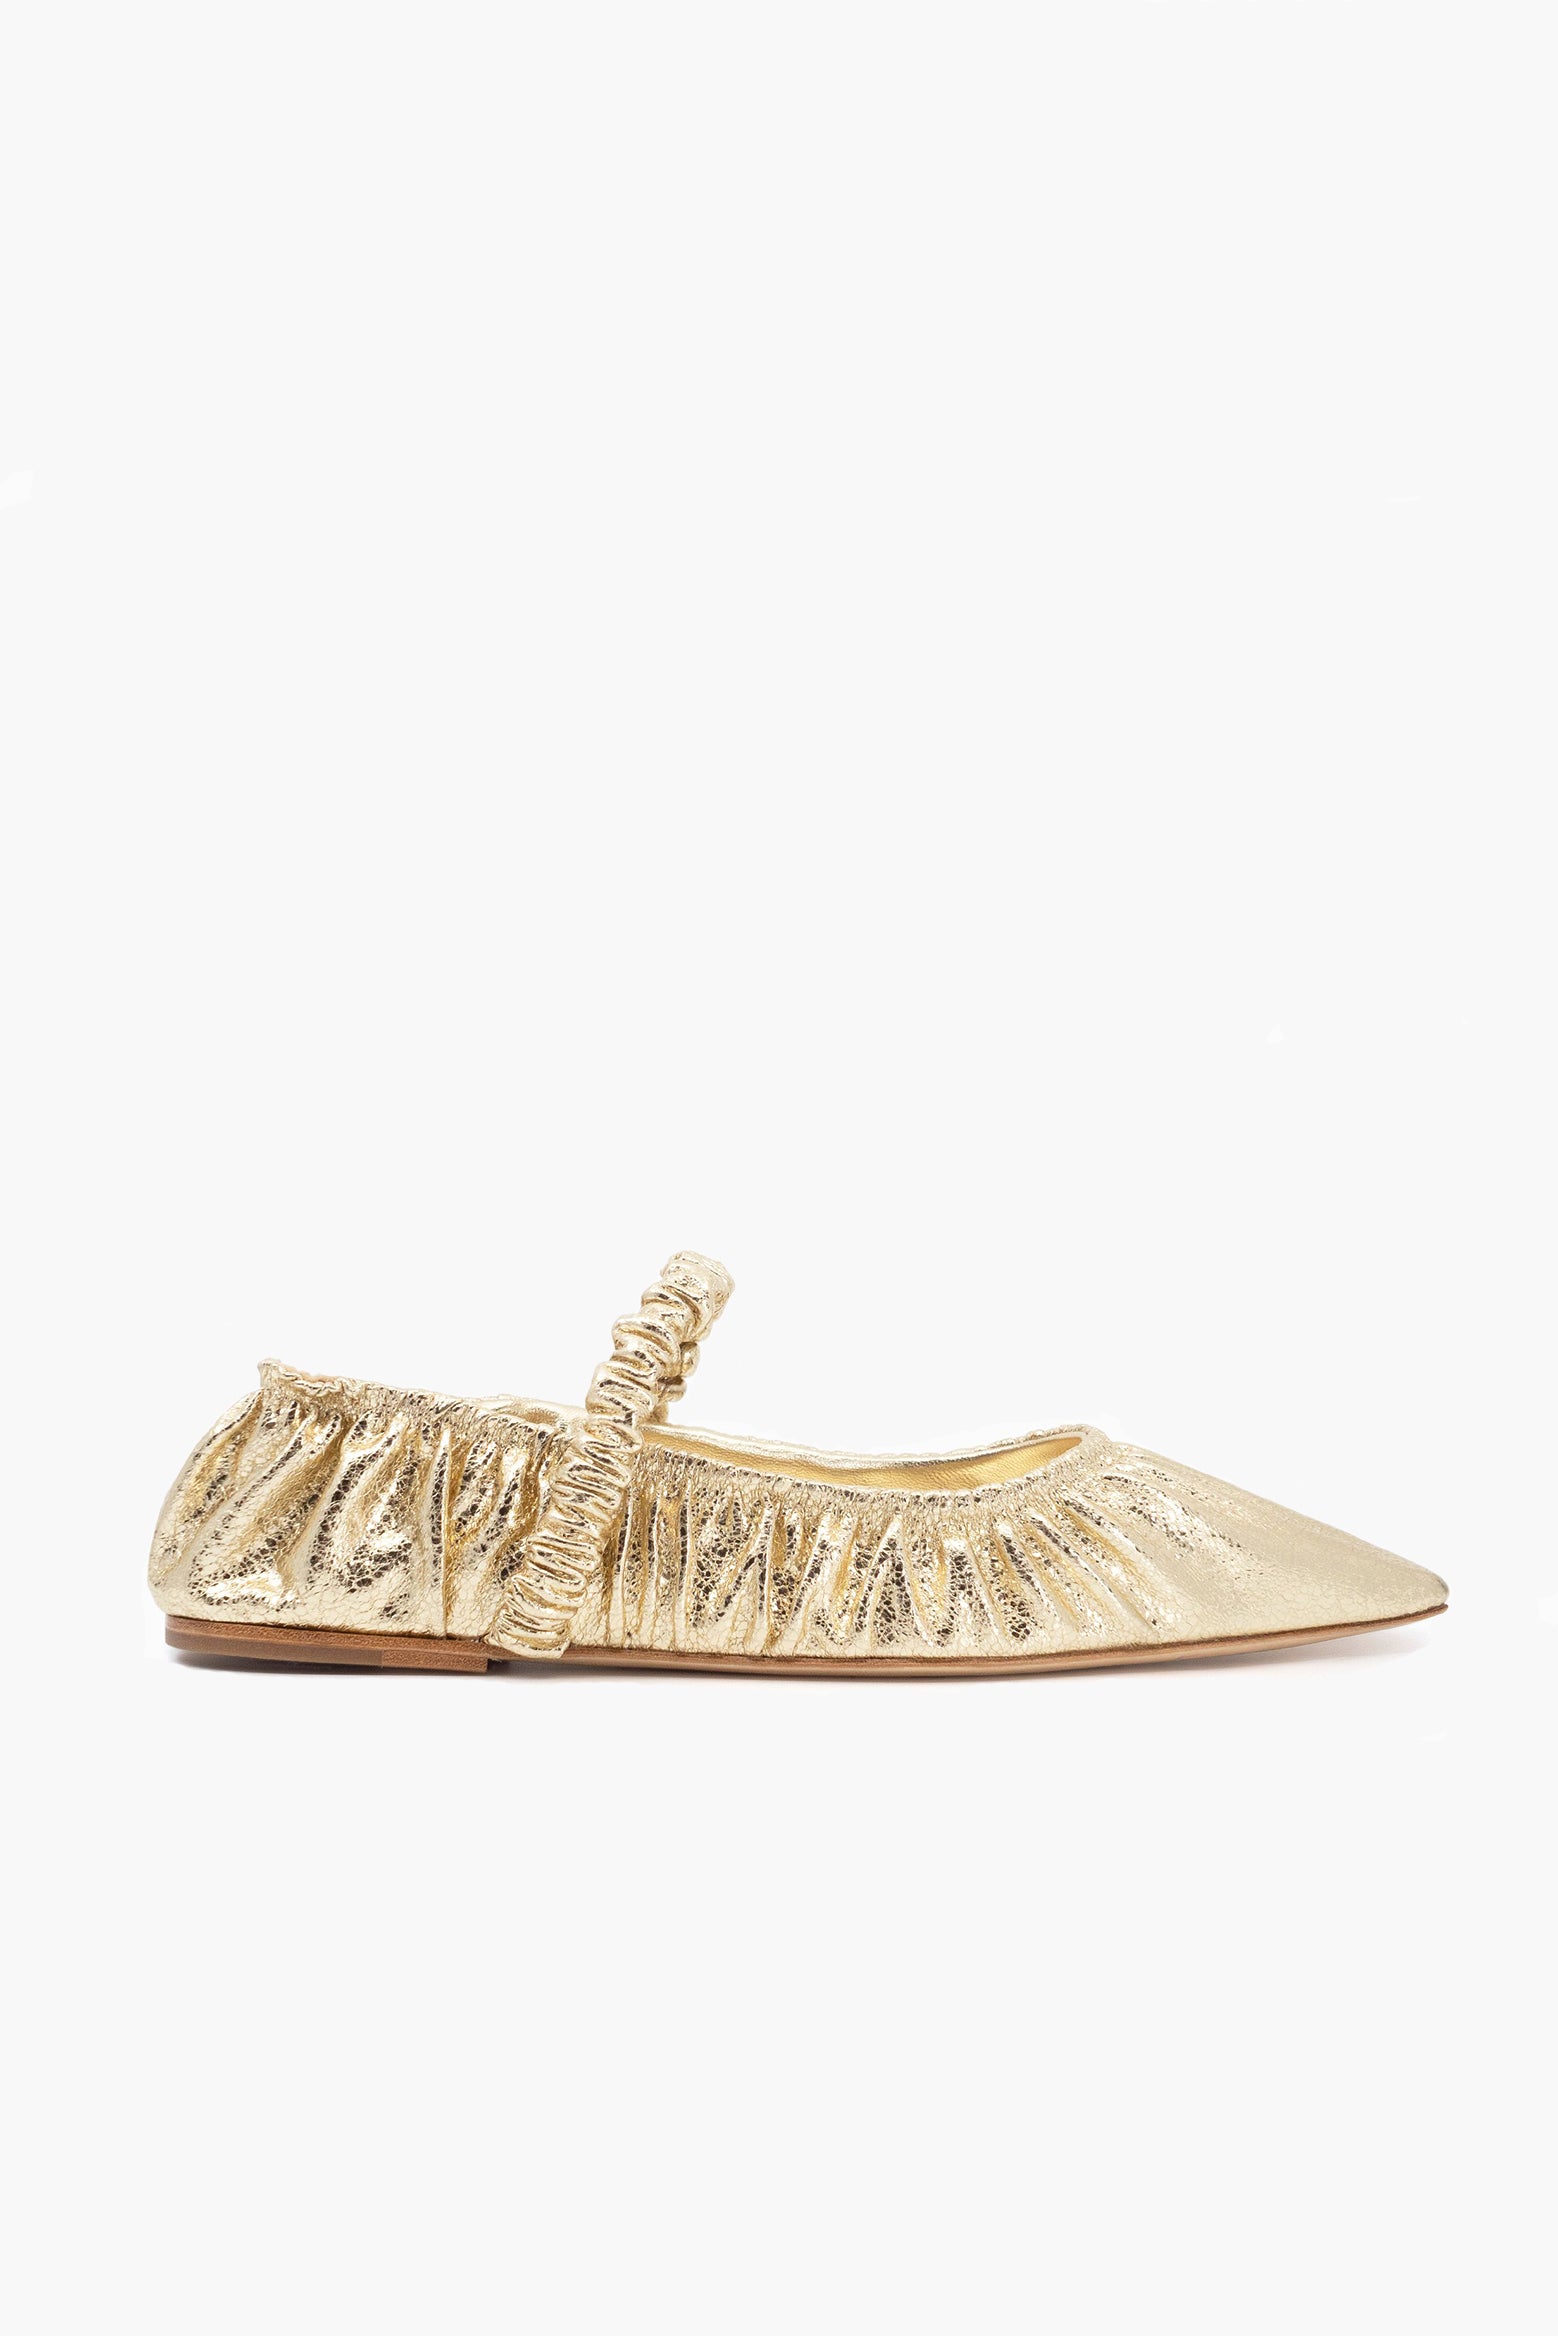 The Studio Amelia Zadie Ballet Flat in Gold available at The New Trend Australia